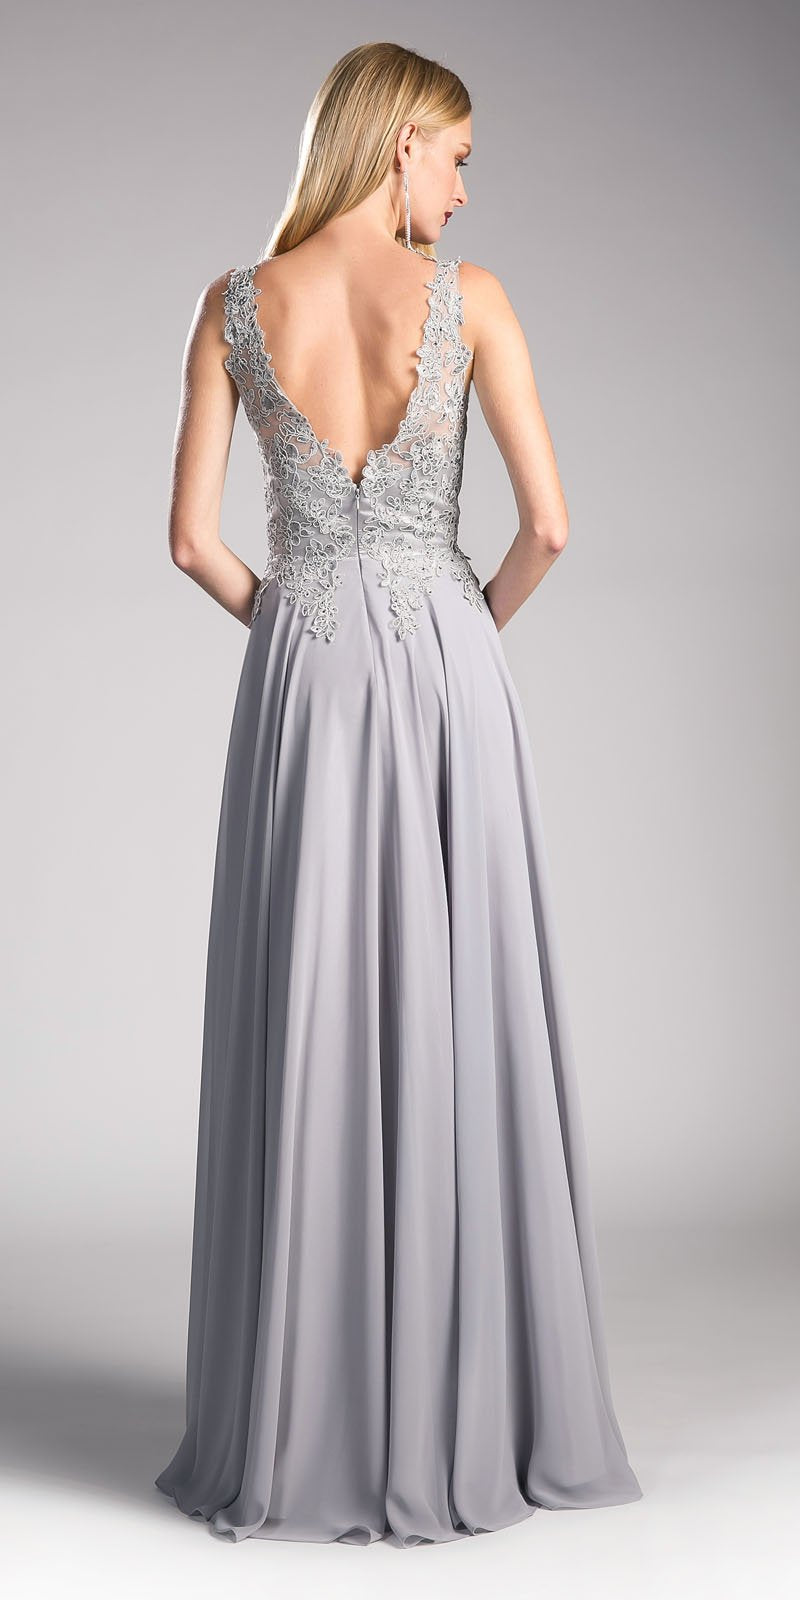 Upscale Floor Length Bridesmaid Dress in 6 colors